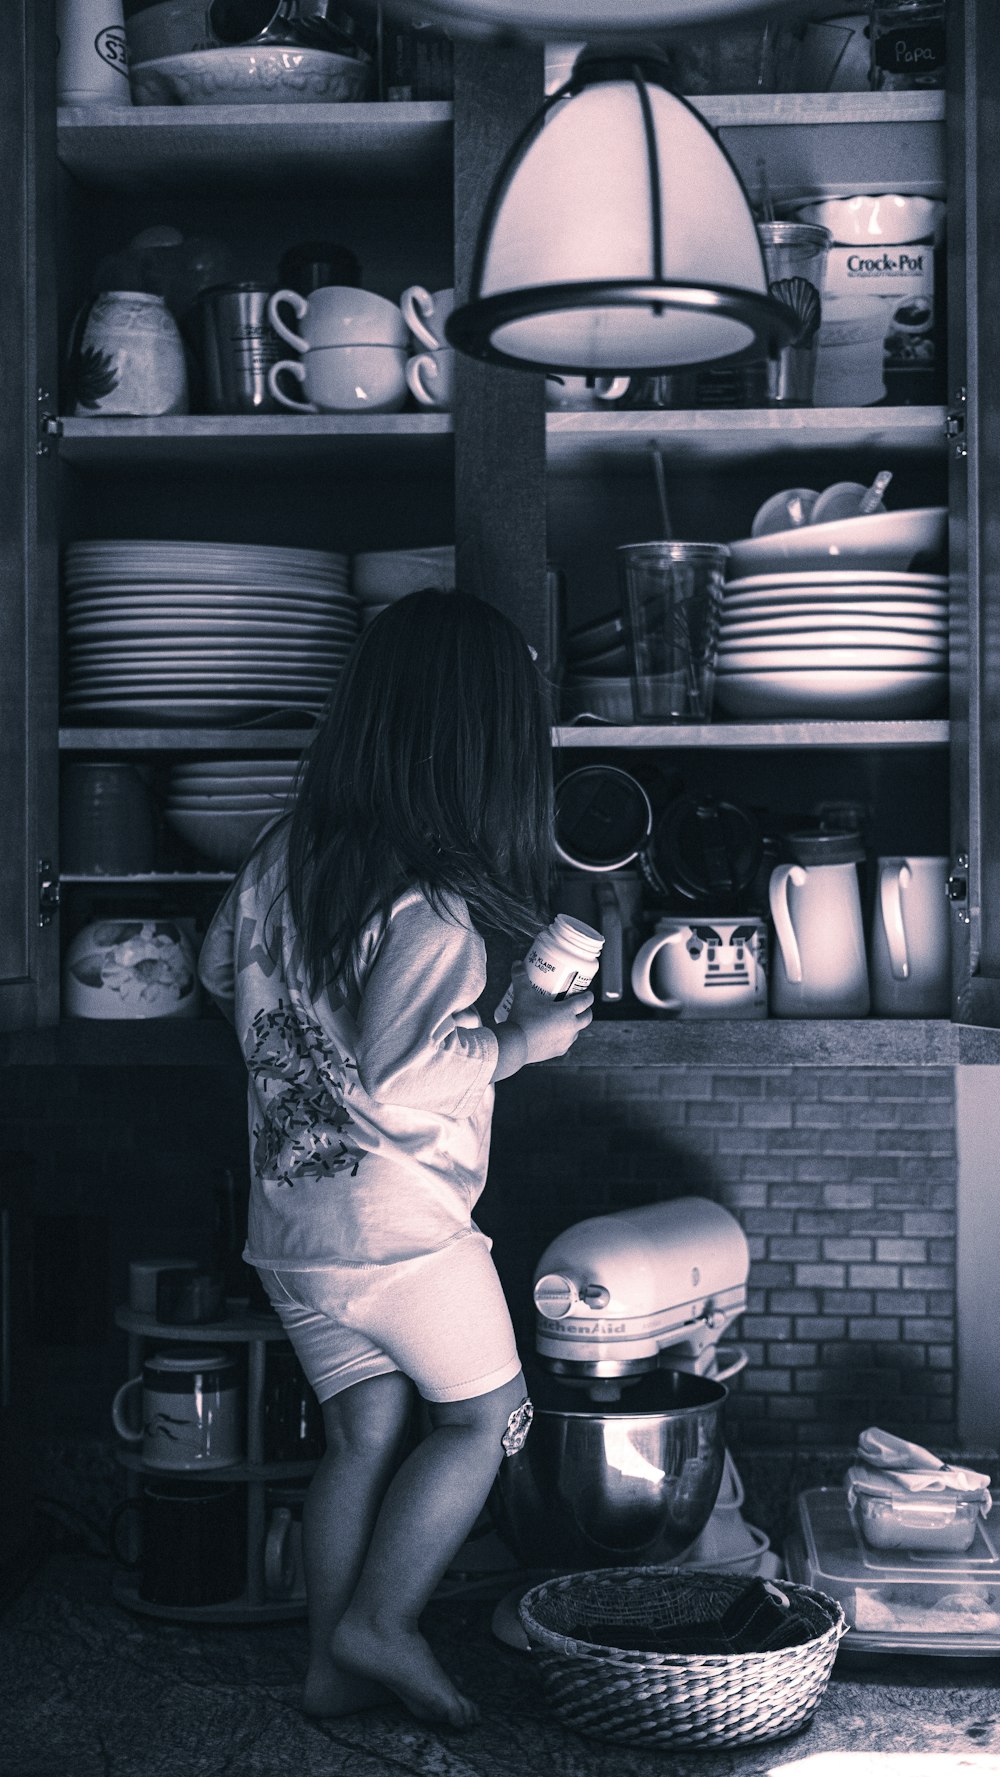 a little girl standing in front of a shelf filled with dishes